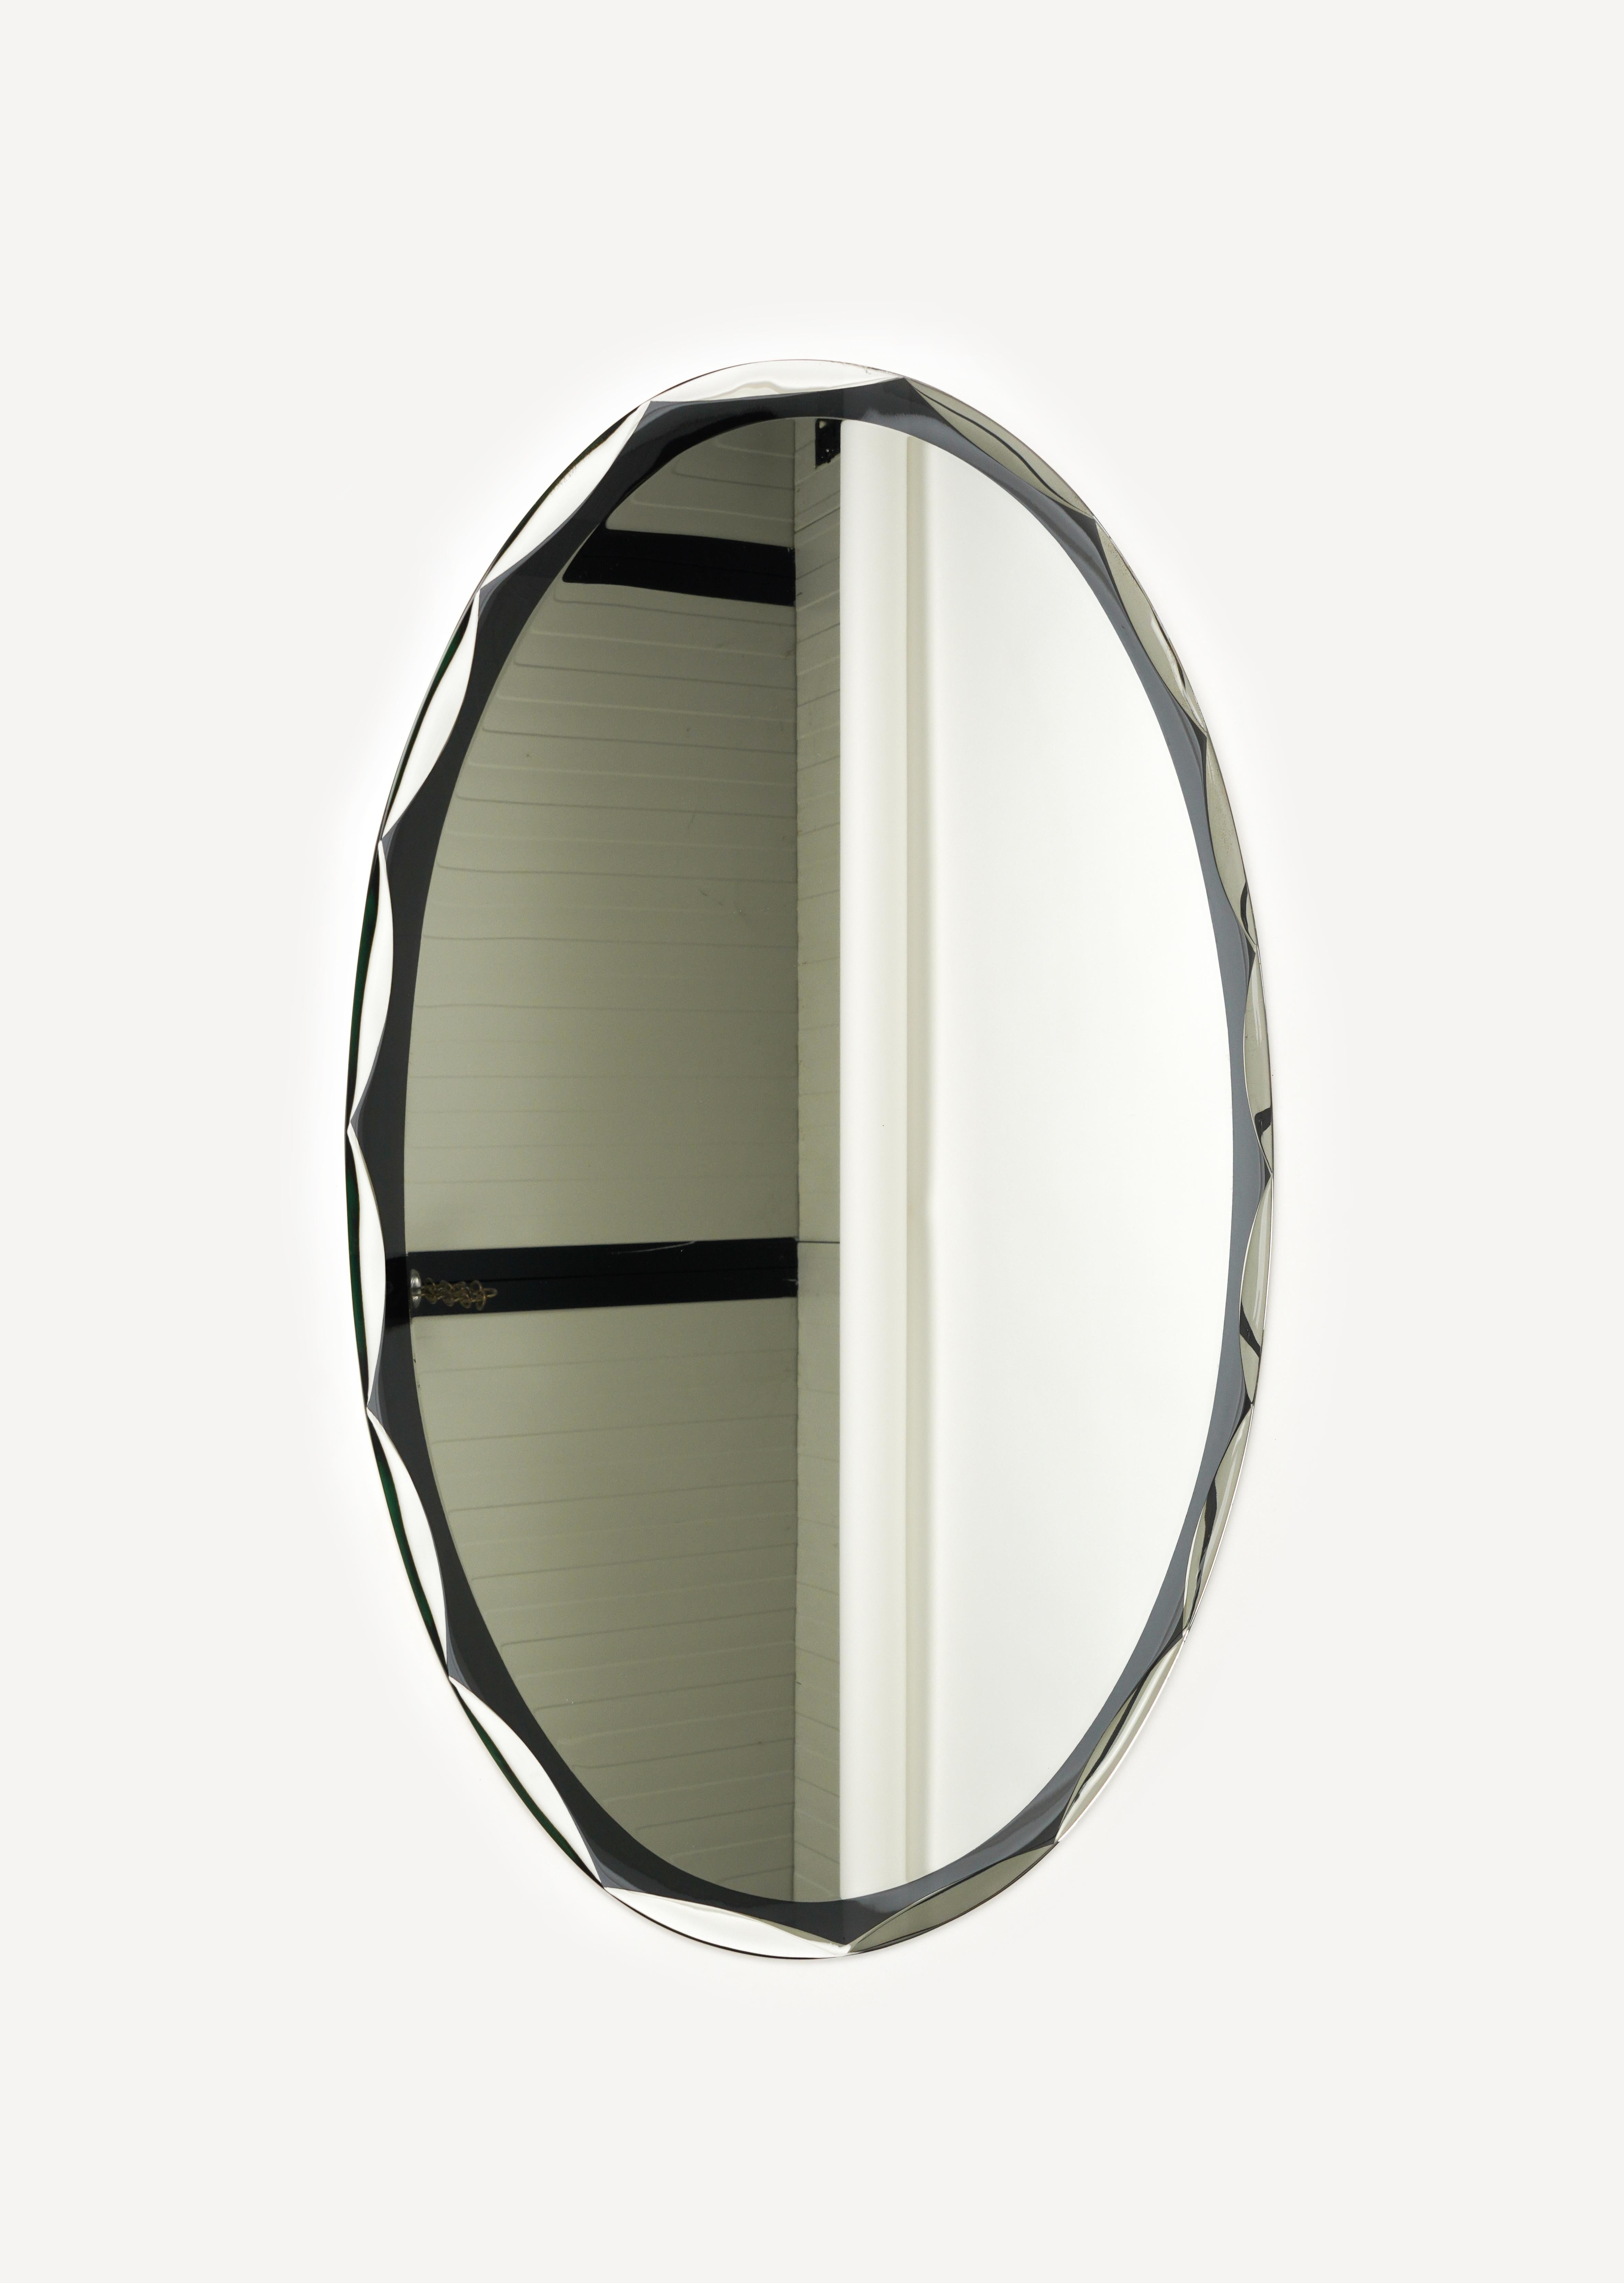 Italian Midcentury Oval Wall Mirror Attributed to Metalvetro Galvorame, Italy 1970s For Sale